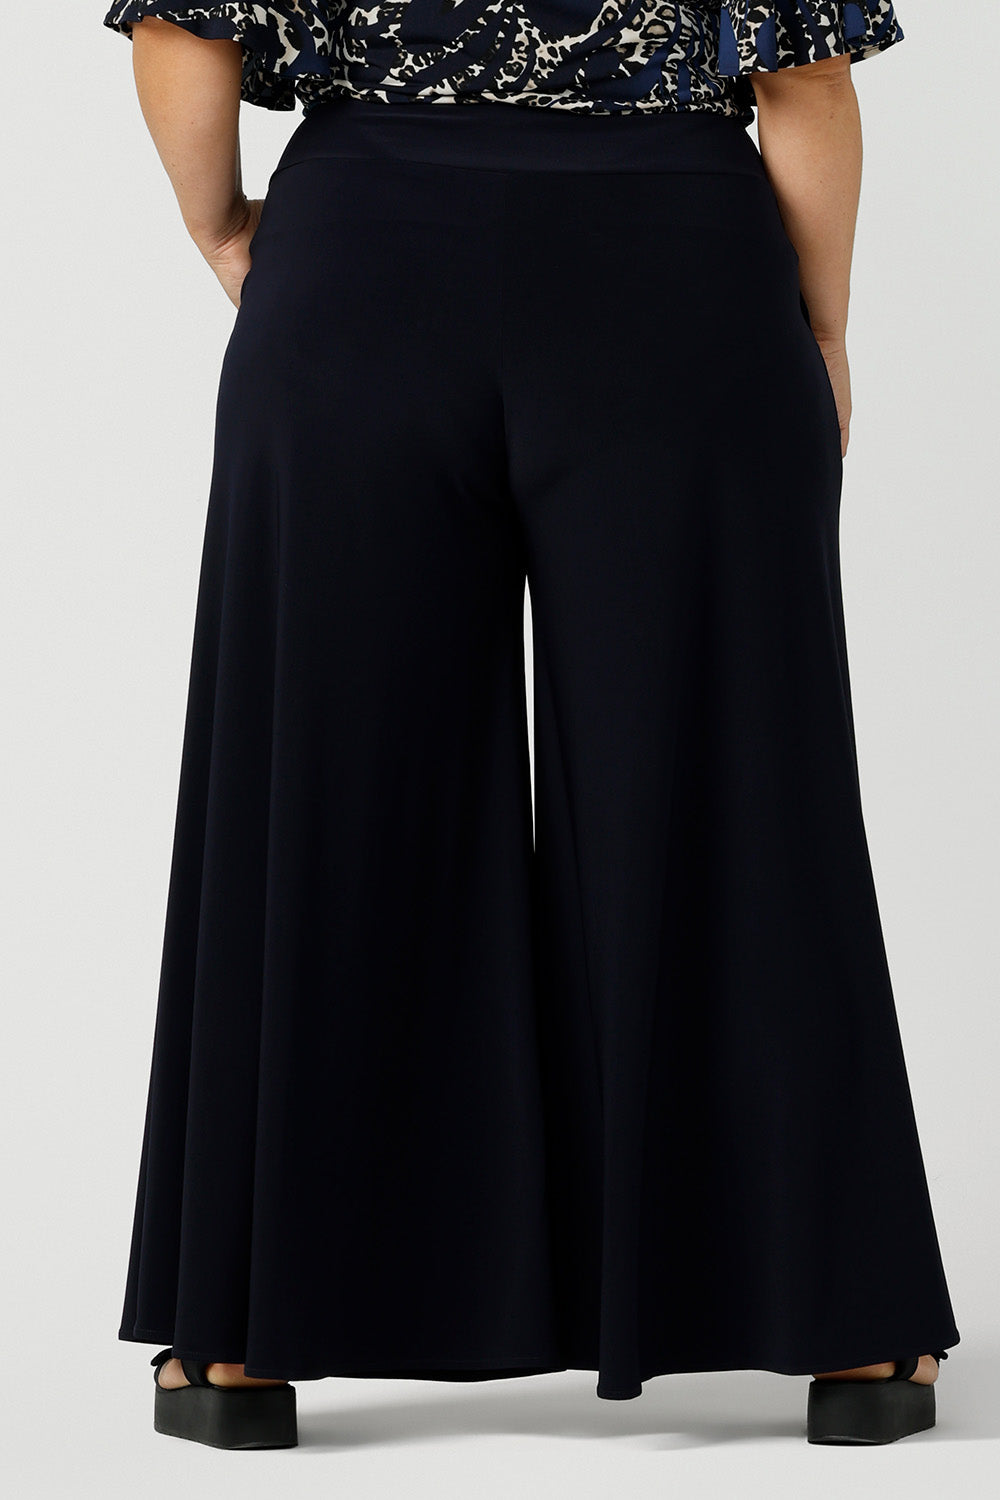 Back view of A curvy, size 16 woman wears navy wide leg pants with pockets. These pull-on, easy care pants are comfortable for your everyday capsule wardrobe. Shop these Australian-made wide leg trousers online in sizes 8 to 24, petite to plus sizes.